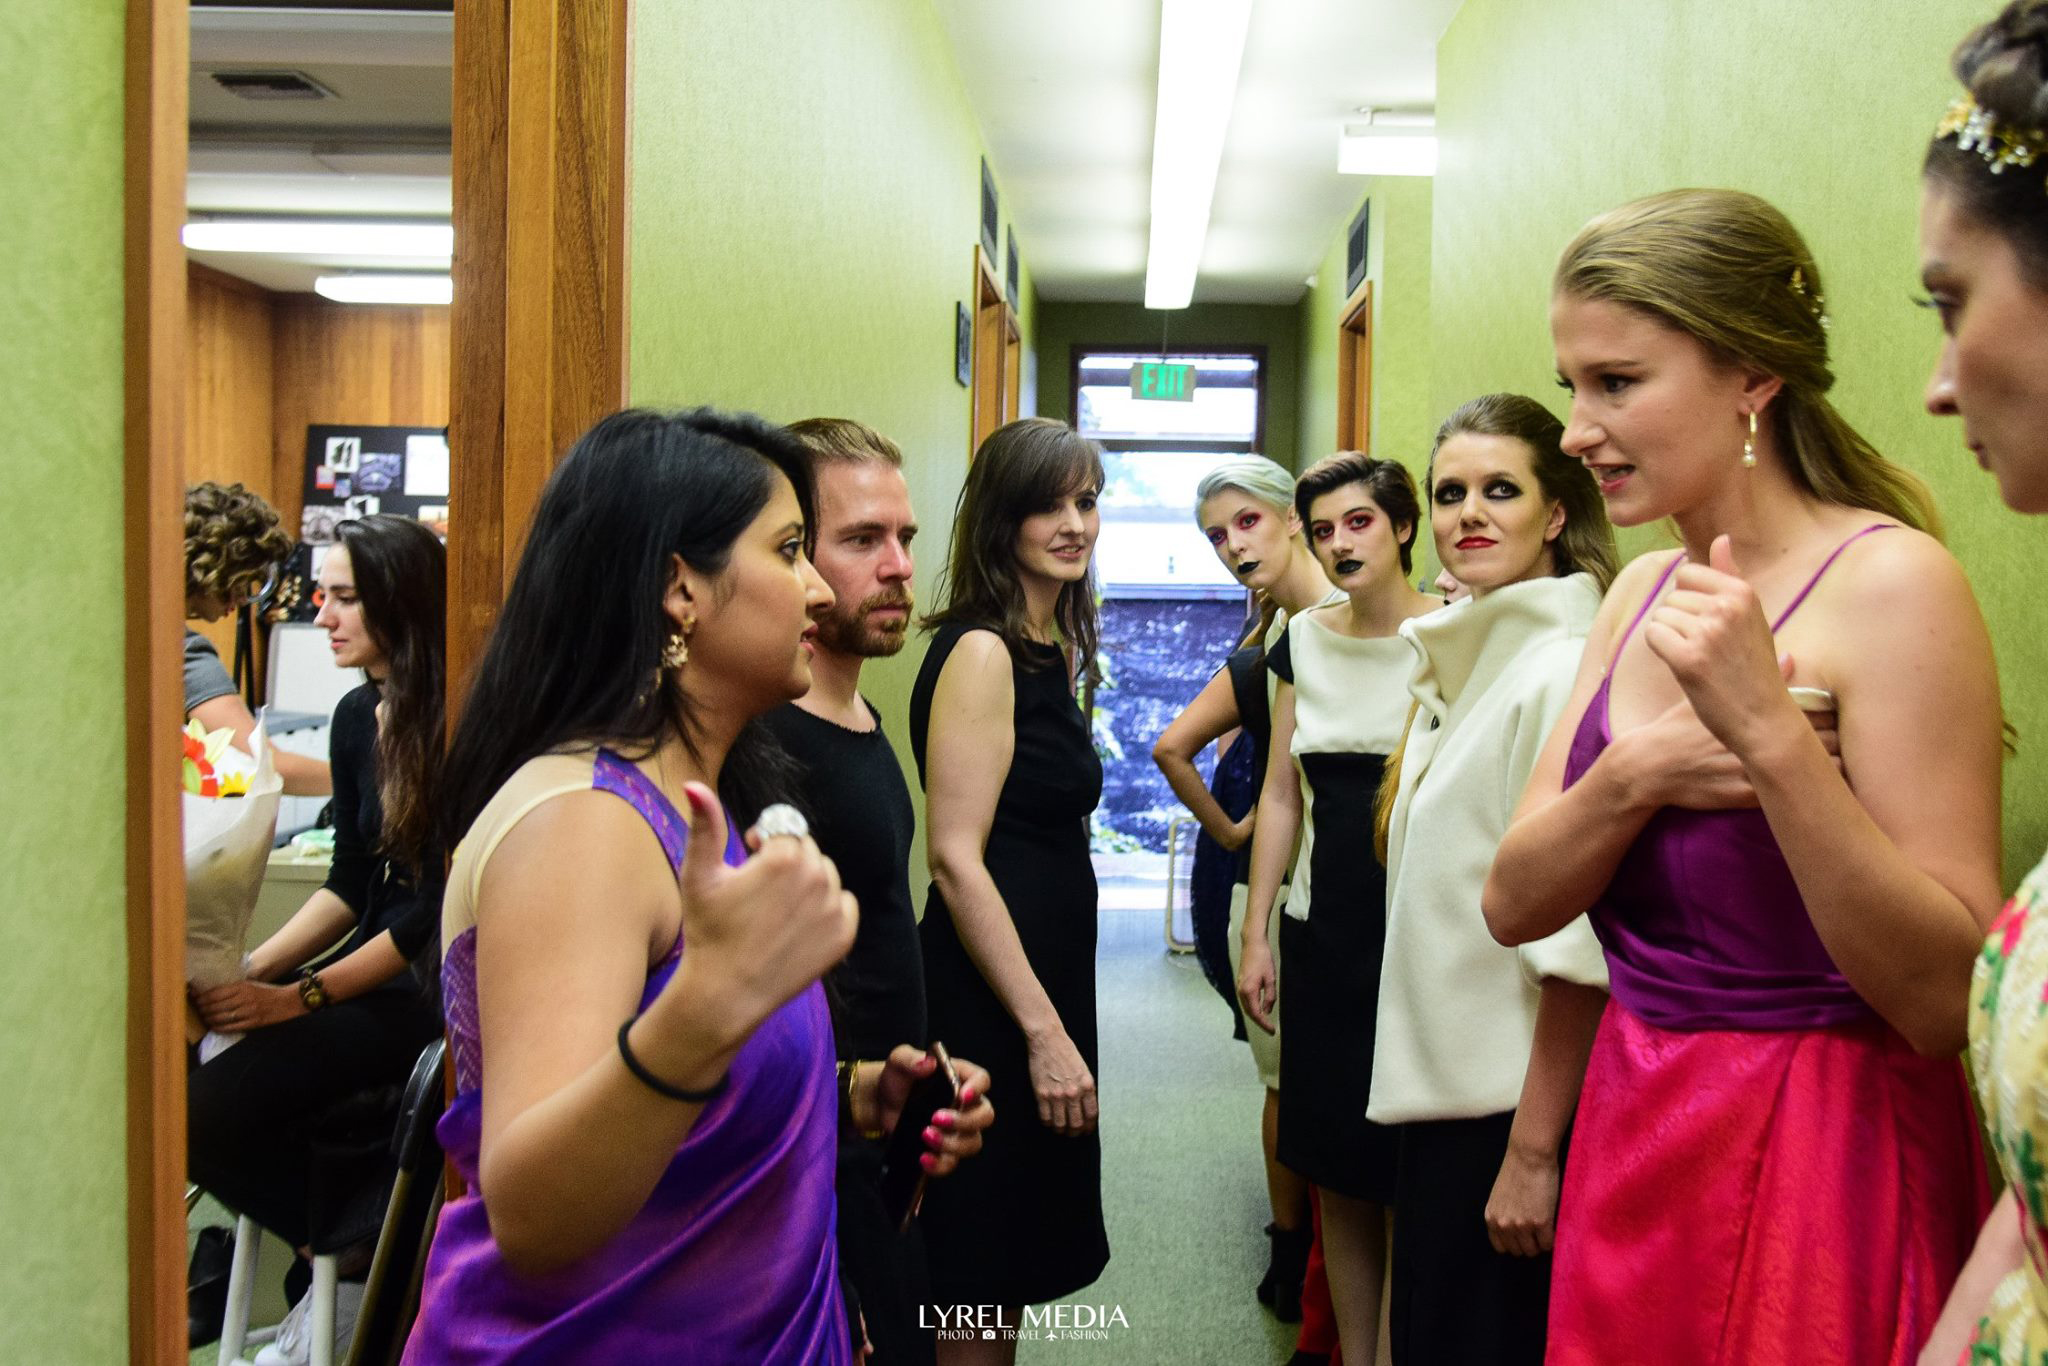 Behind The Scenes: Models lining up before the show